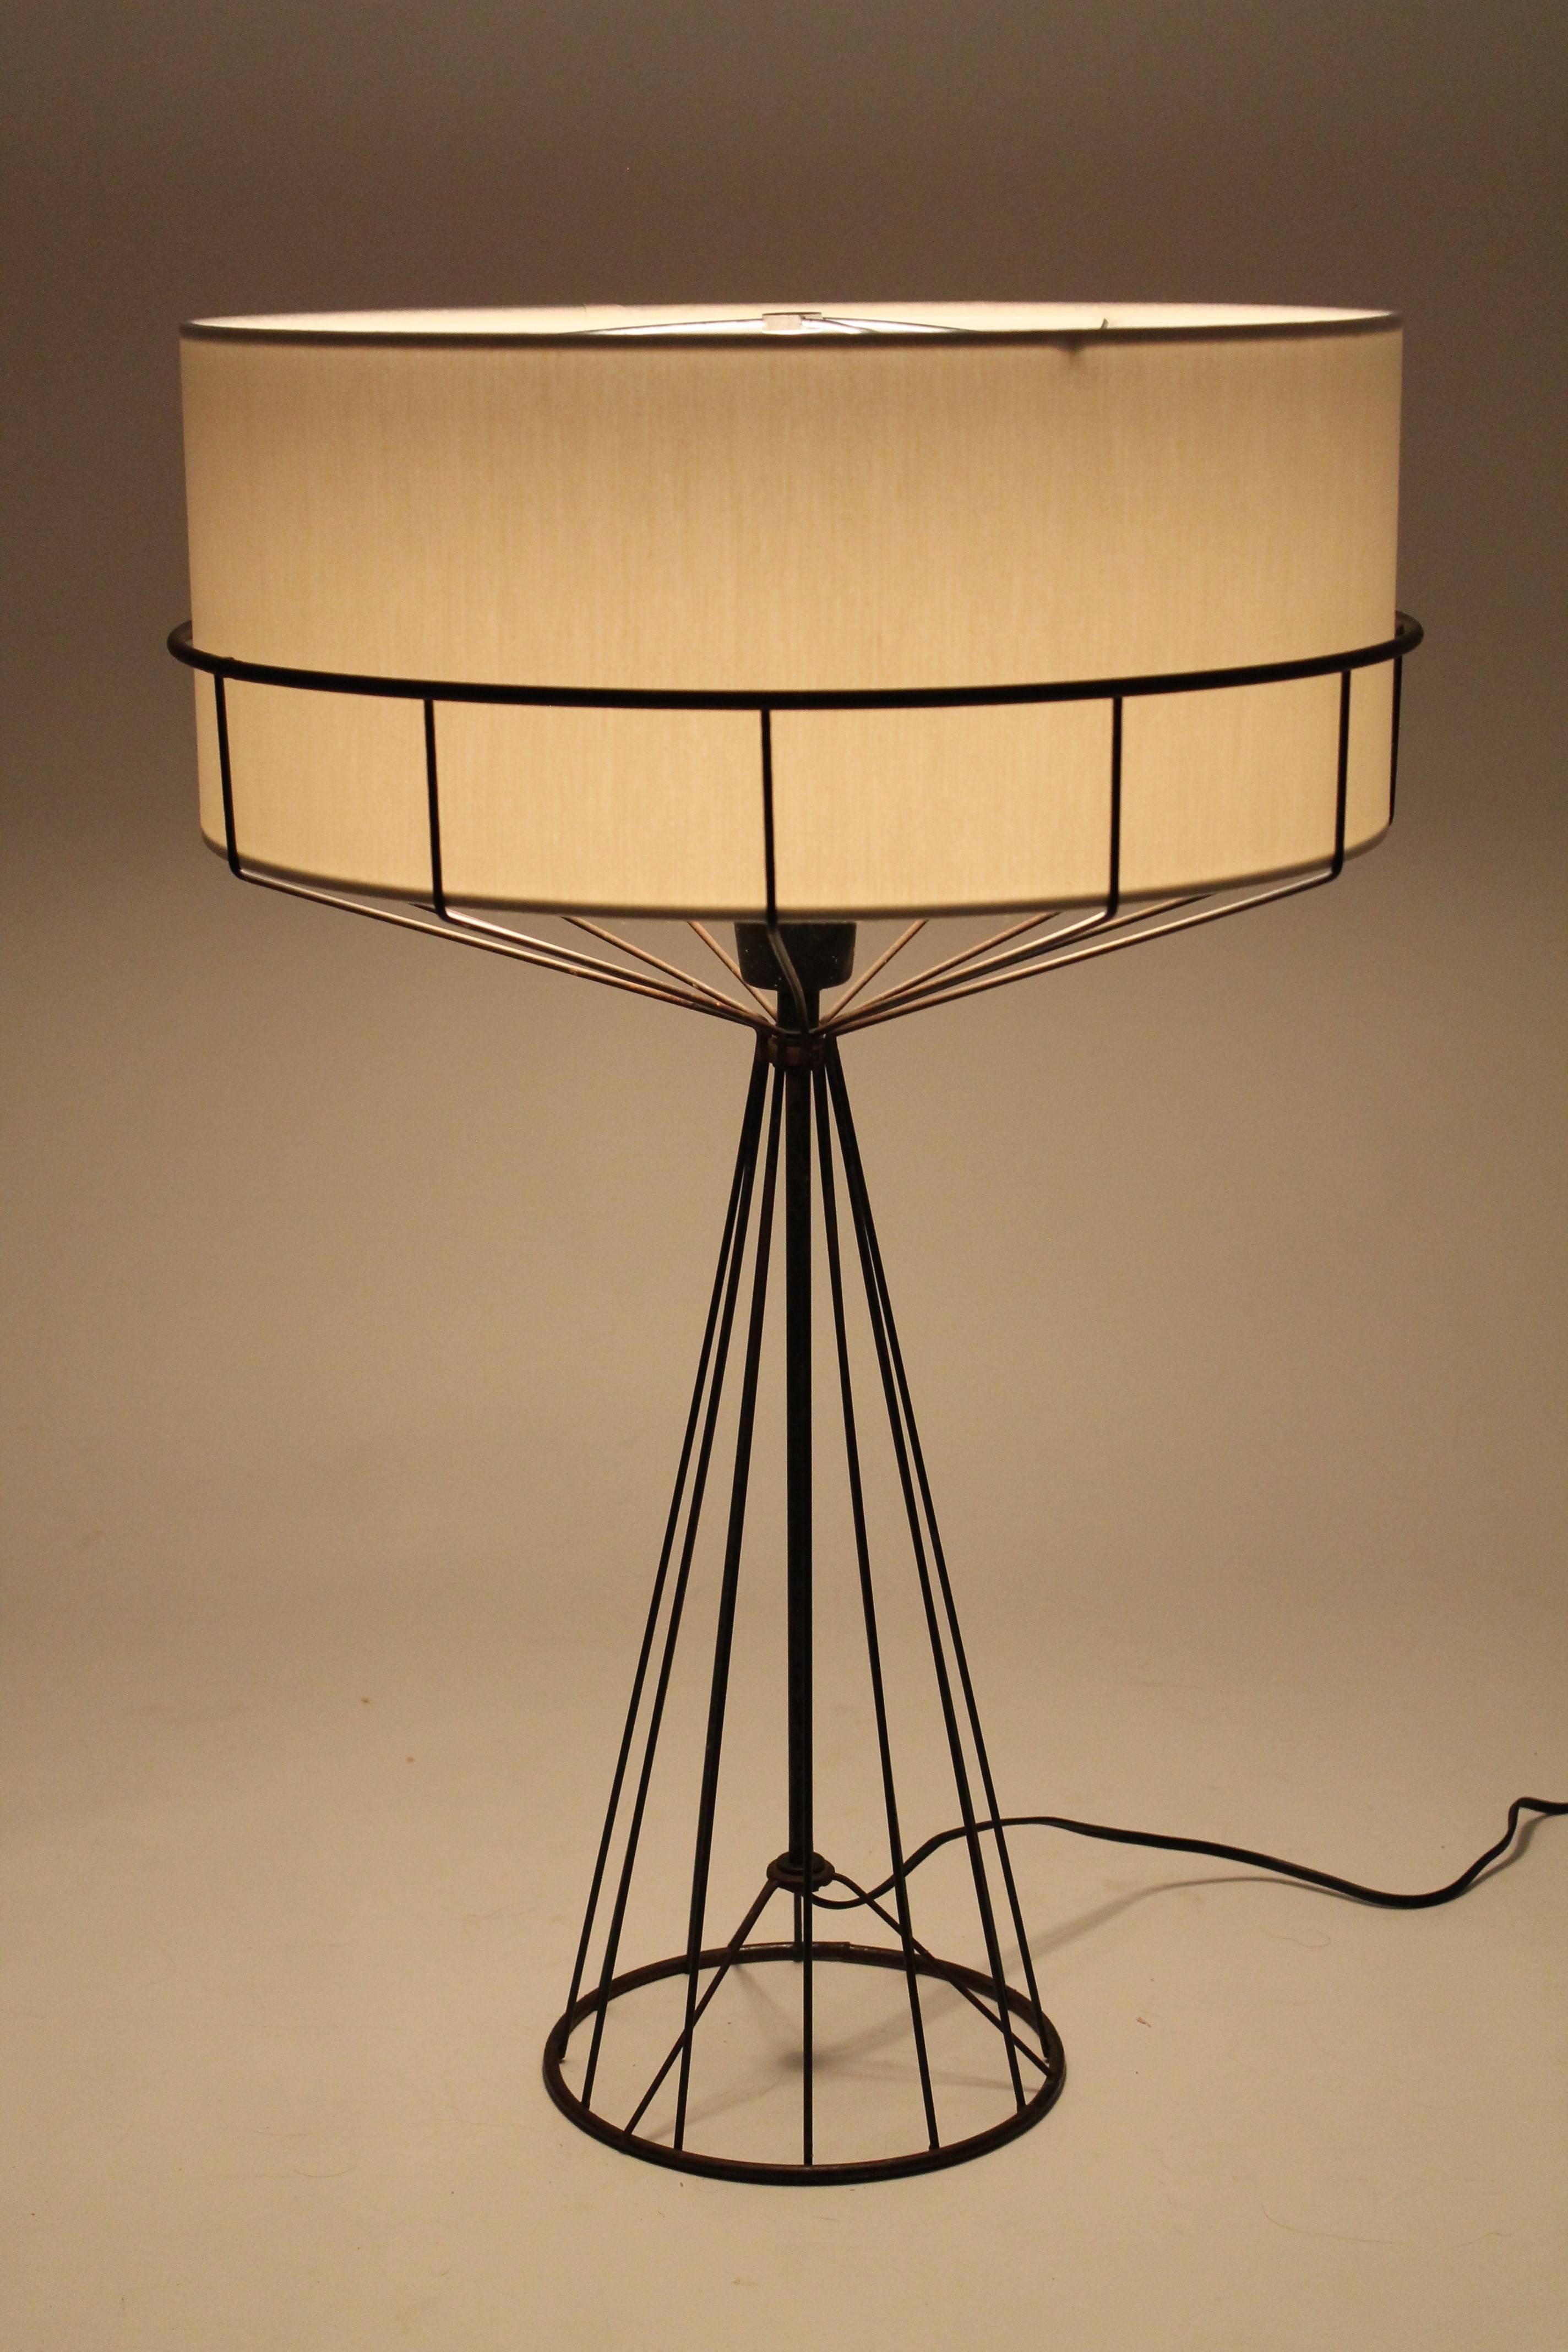 Iconic lighting art piece with a distinctive modern design , way ahead of its time for the period .  

Lamp is proposed in original as found condition, light rust and pitting on all surface, see close-up on last picture.

Lamp could be sandblasted